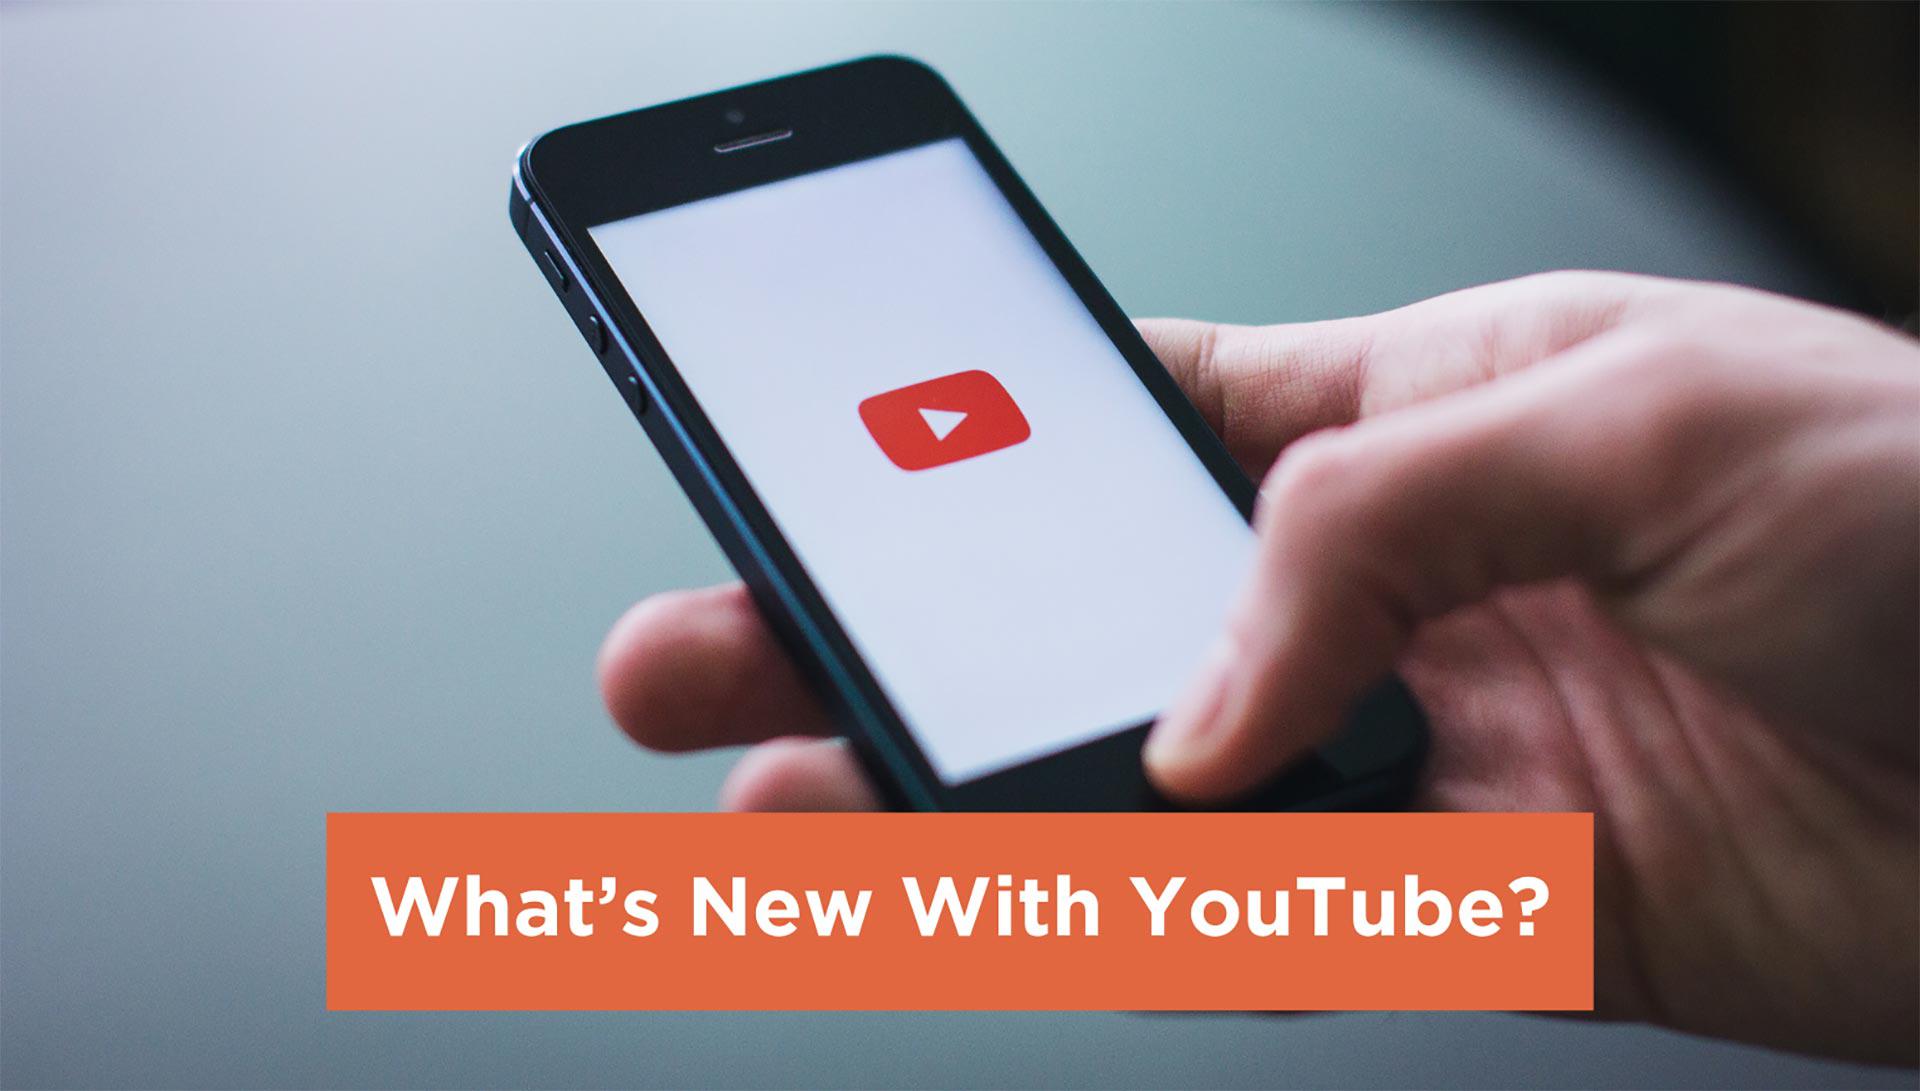 What’s New With YouTube?